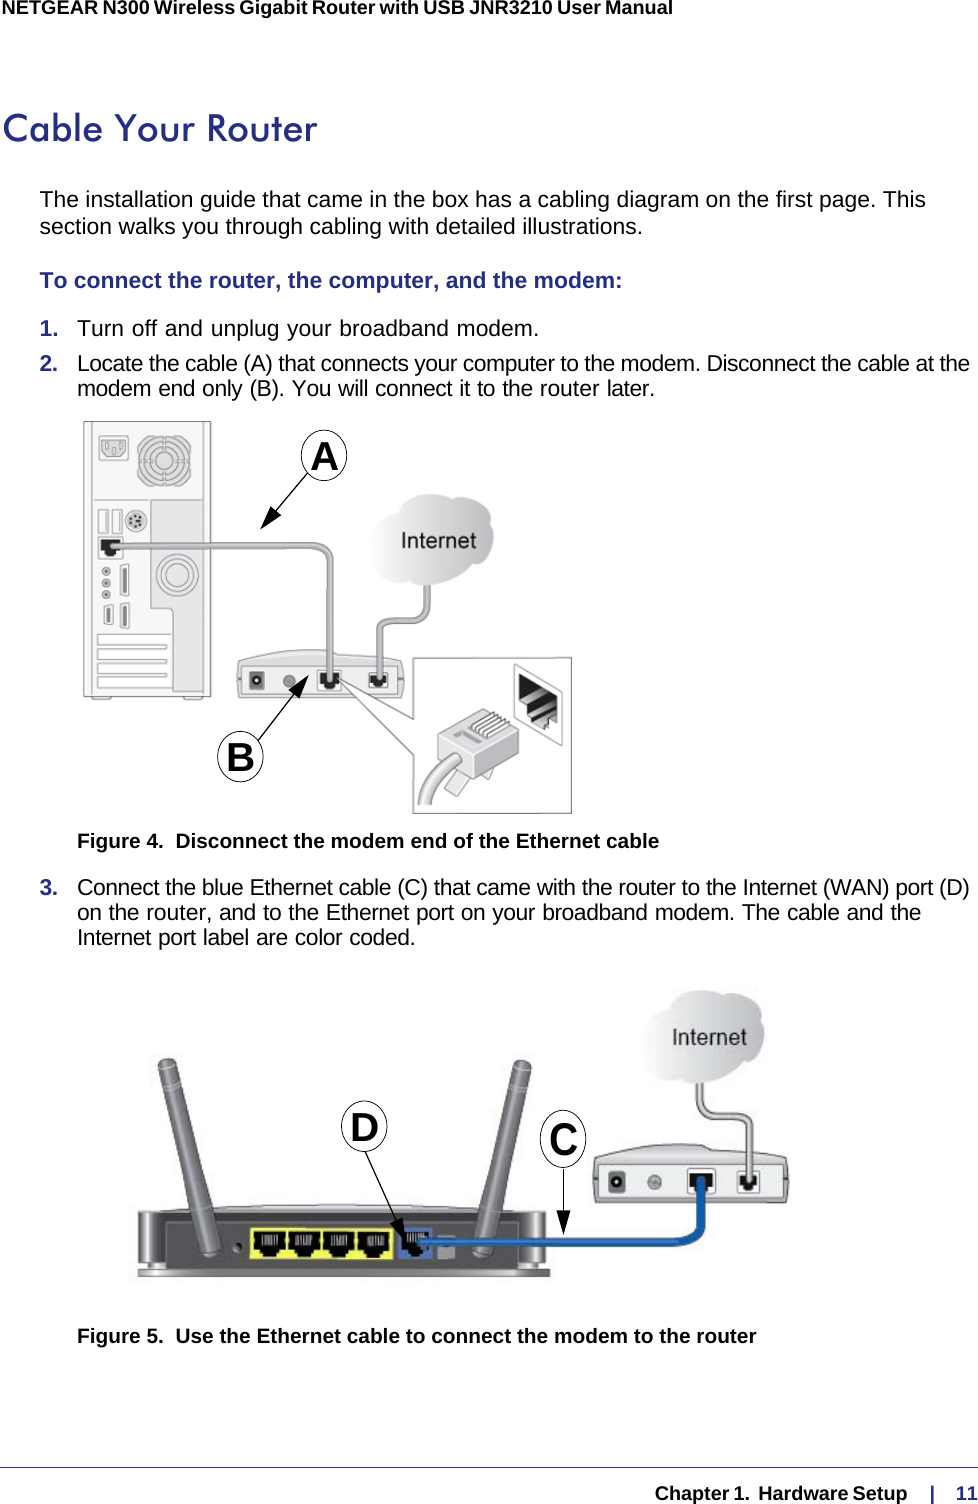   Chapter 1.  Hardware Setup     |    11NETGEAR N300 Wireless Gigabit Router with USB JNR3210 User Manual Cable Your RouterThe installation guide that came in the box has a cabling diagram on the first page. This section walks you through cabling with detailed illustrations.To connect the router, the computer, and the modem:1.  Turn off and unplug your broadband modem.2.  Locate the cable (A) that connects your computer to the modem. Disconnect the cable at the modem end only (B). You will connect it to the router later.ABFigure 4.  Disconnect the modem end of the Ethernet cable3.  Connect the blue Ethernet cable (C) that came with the router to the Internet (WAN) port (D) on the router, and to the Ethernet port on your broadband modem. The cable and the Internet port label are color coded.CDFigure 5.  Use the Ethernet cable to connect the modem to the router